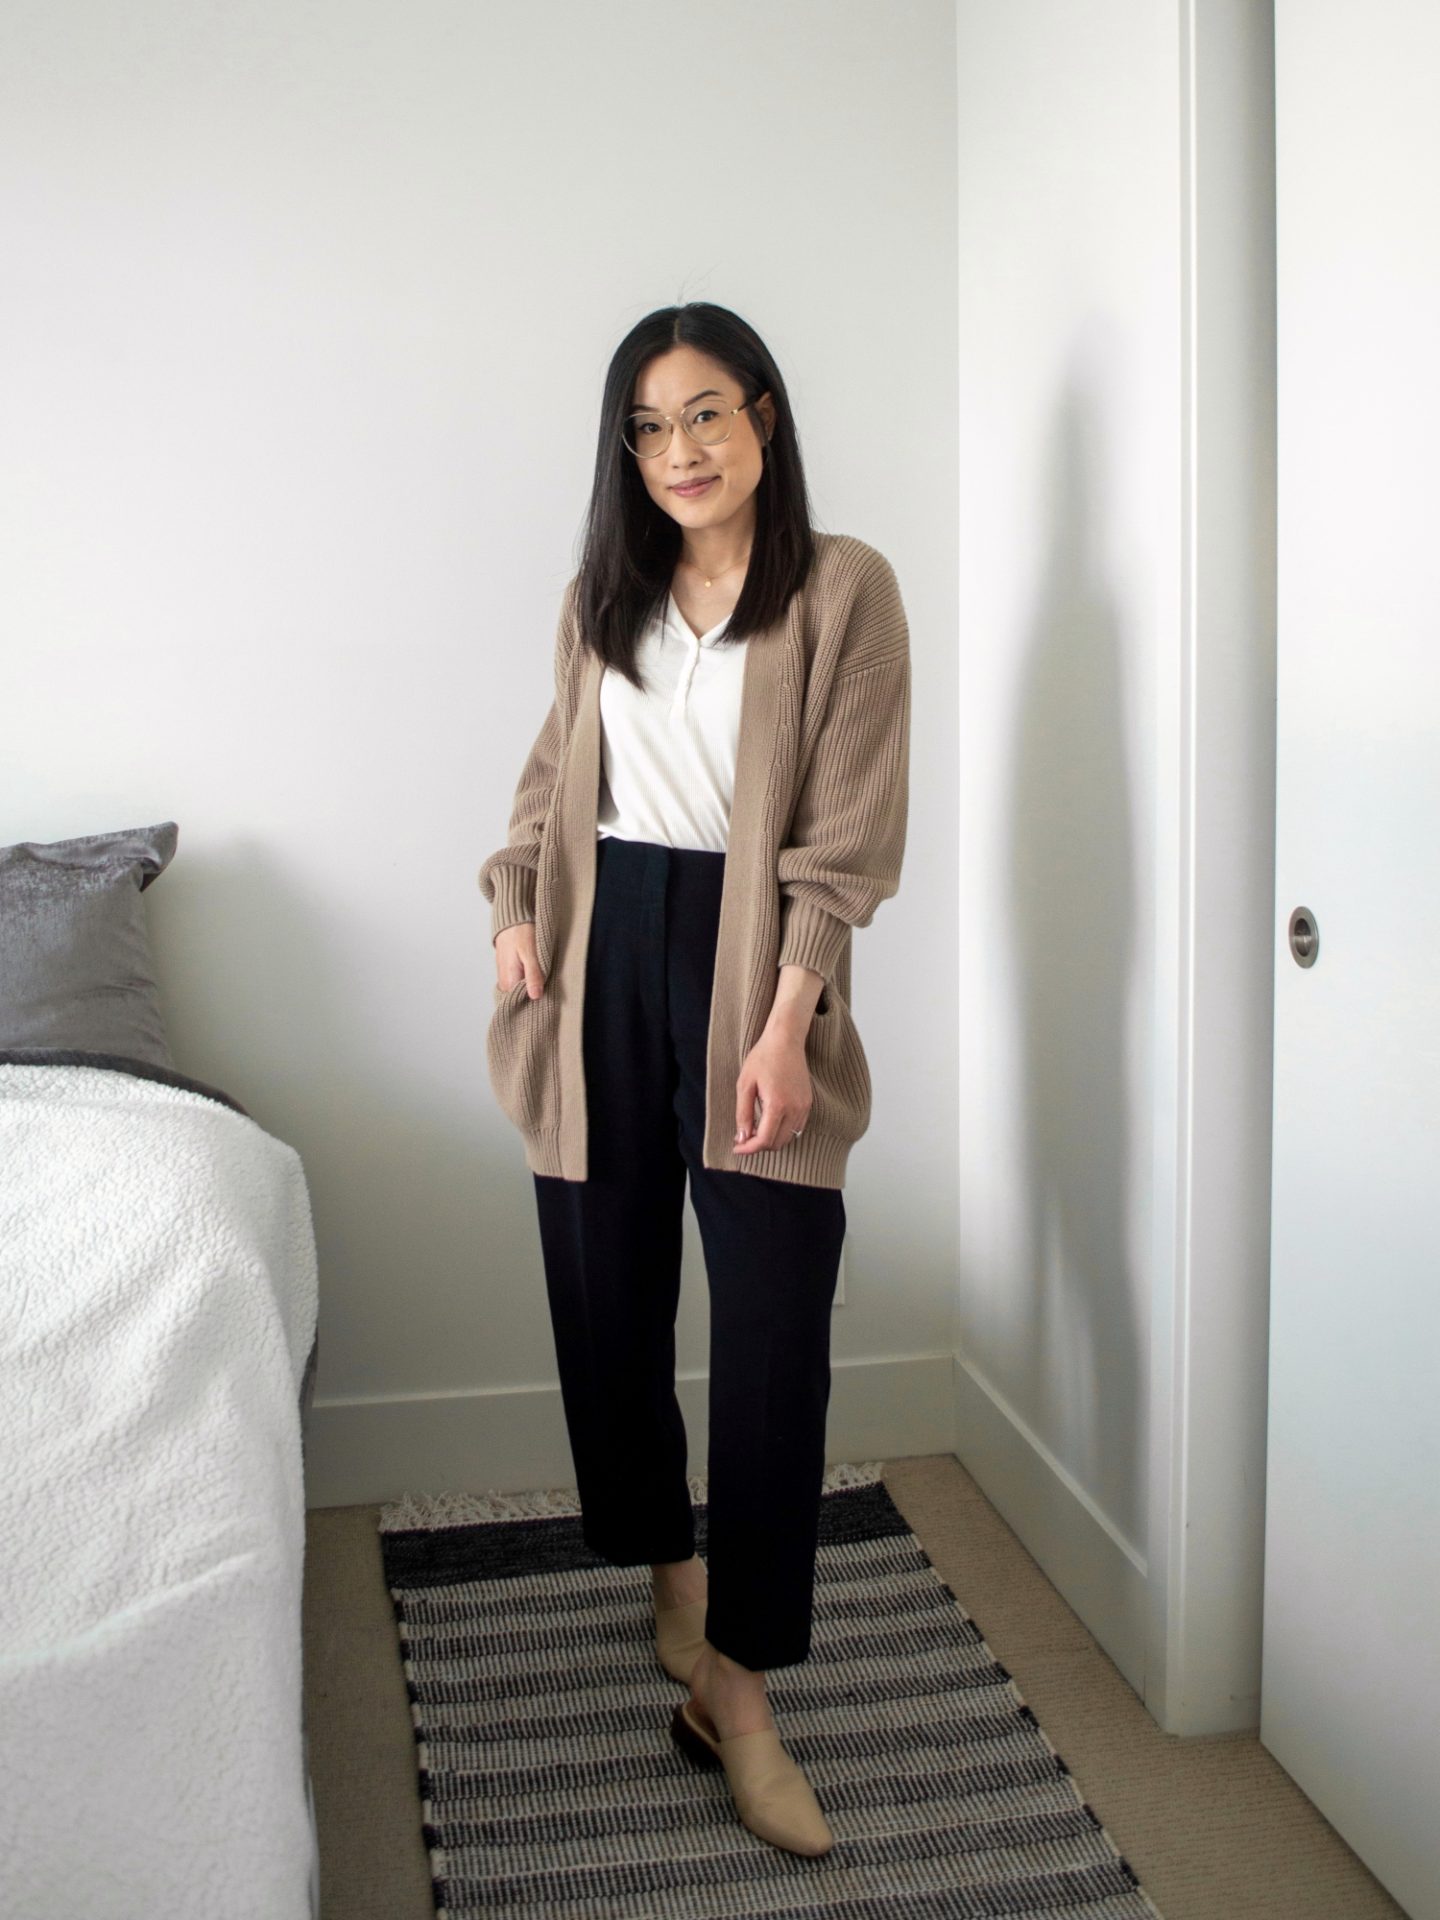 Her Simple Sole - Simple Minimal Style - Thoughts on Dainty Jewelry